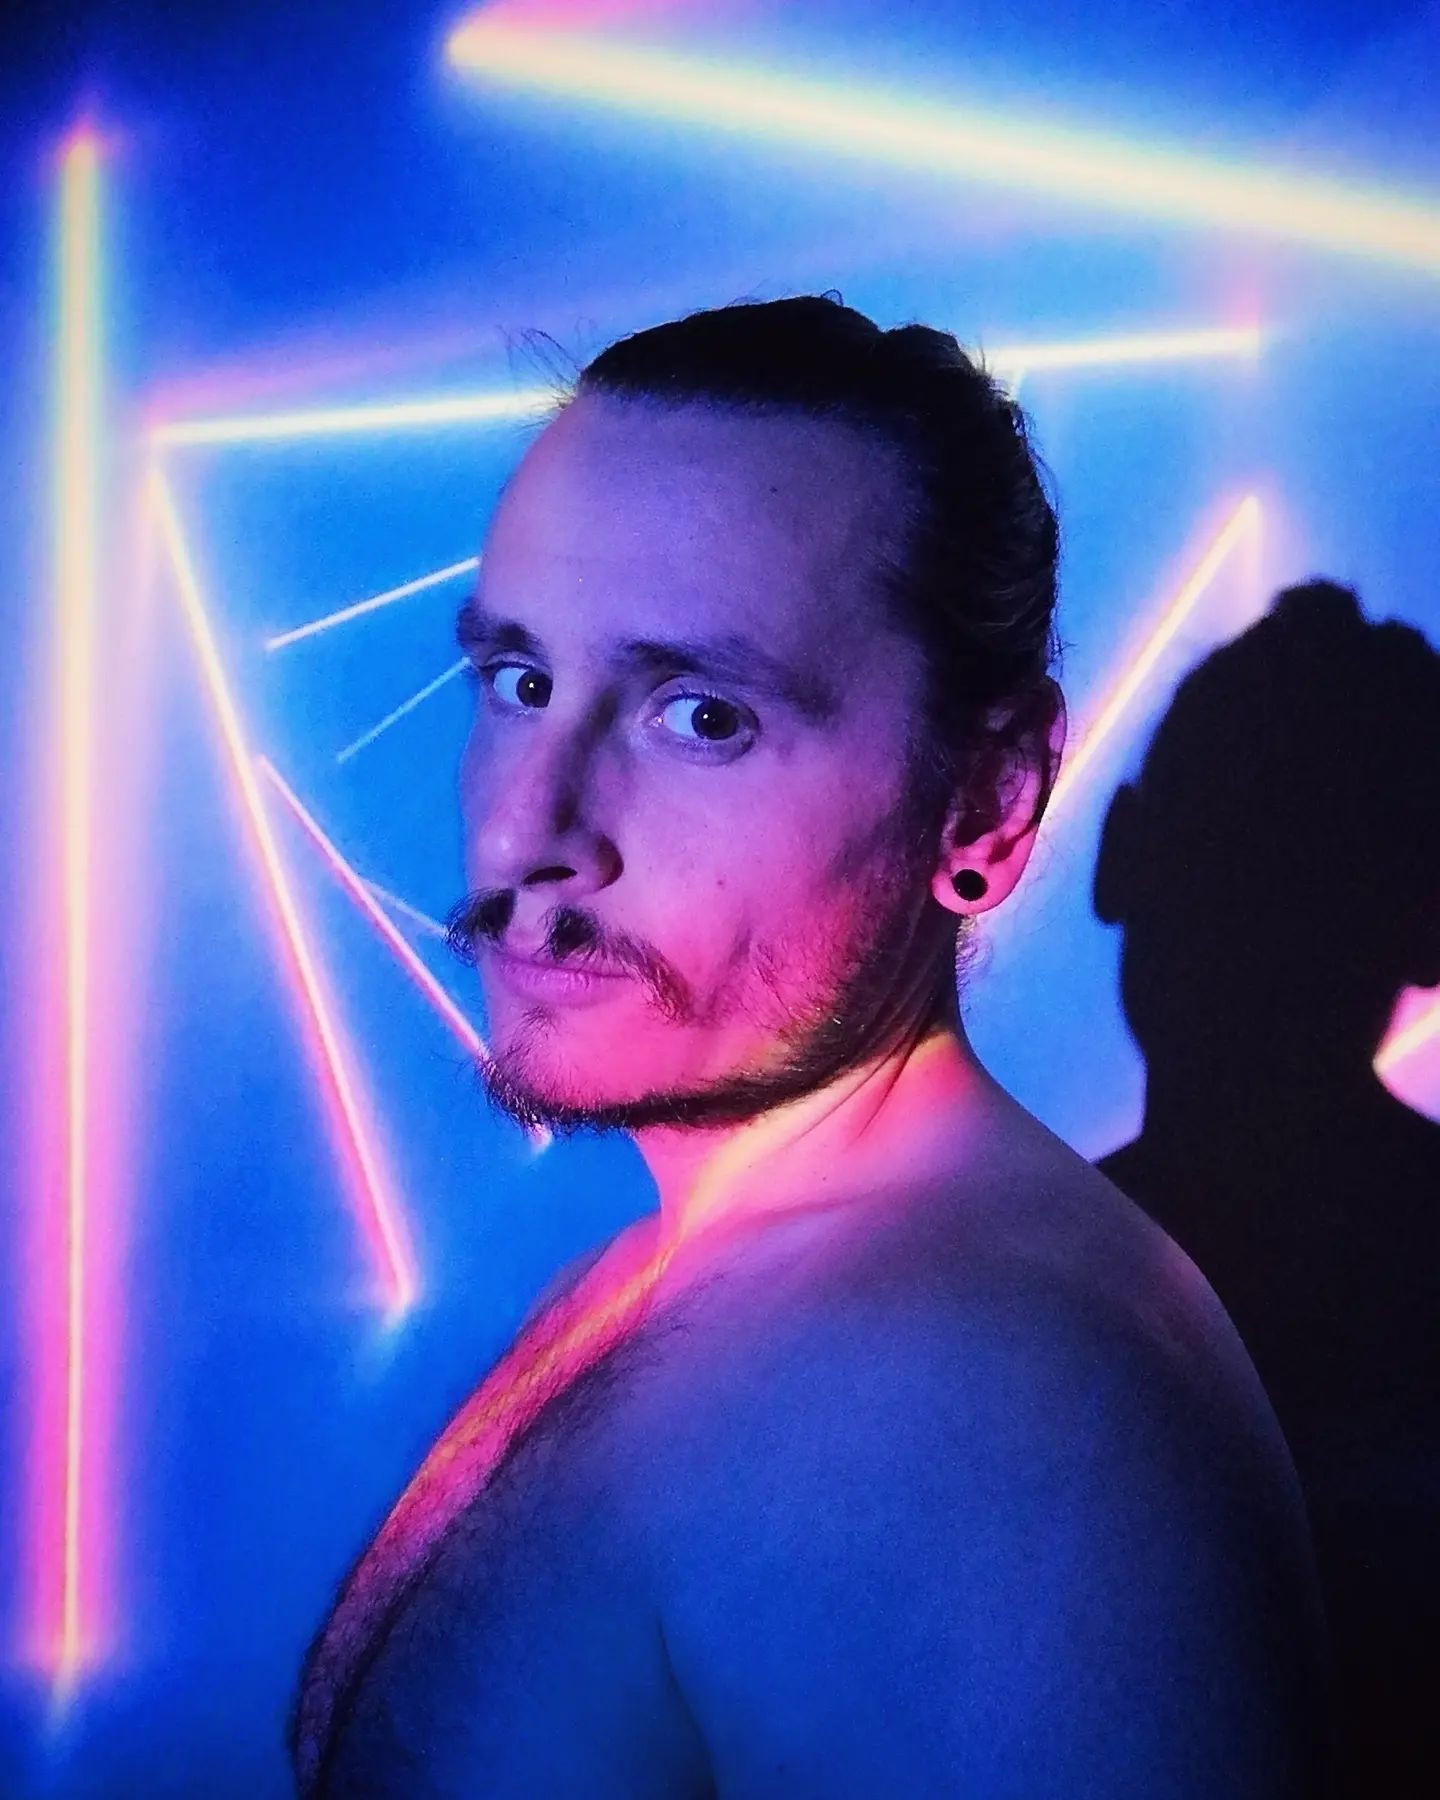 Something old I just saw and decided to share with you. I think that's 2019 because I had long hair then.
.
.
.
. #blue #neonlights #portrait #instaphoto #photooftheday #longhair #autoportrait #2019 #lights